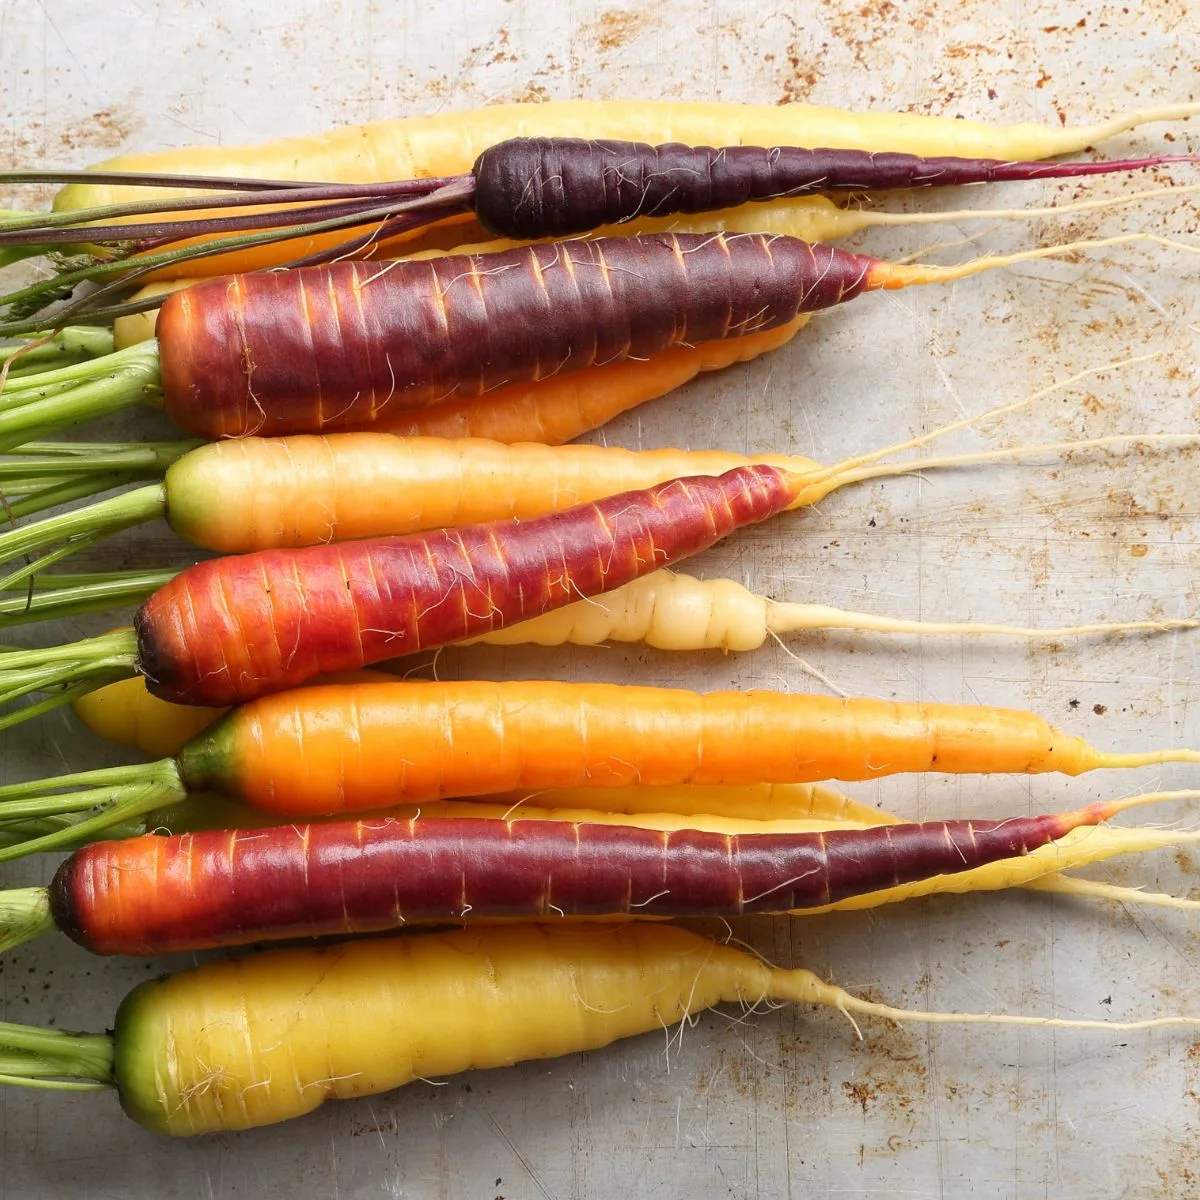 colorful carrots lines up on a flat surface.